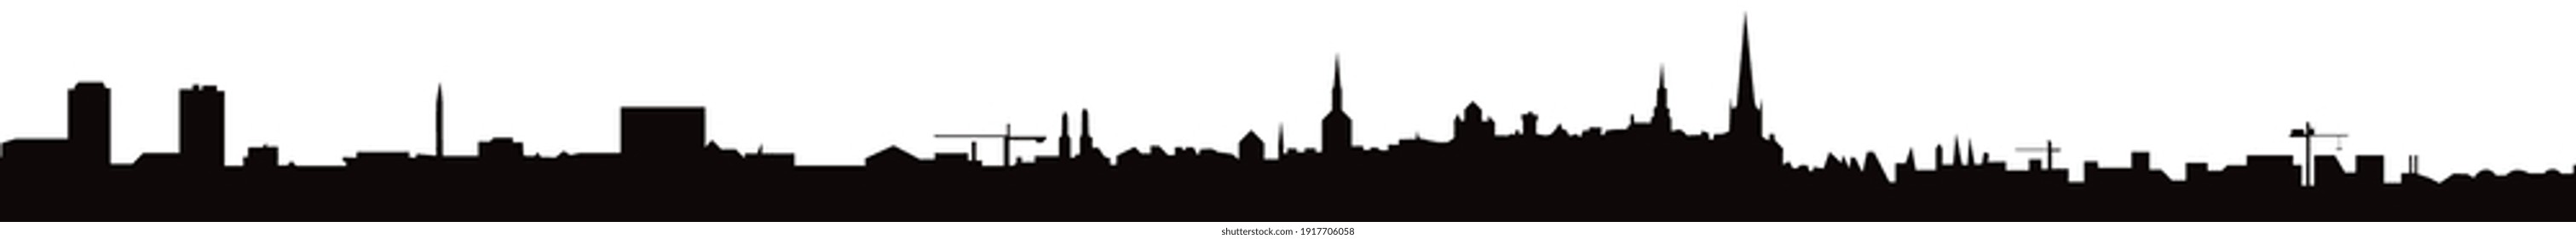 Long city skyline isolated on white. Footer for website.